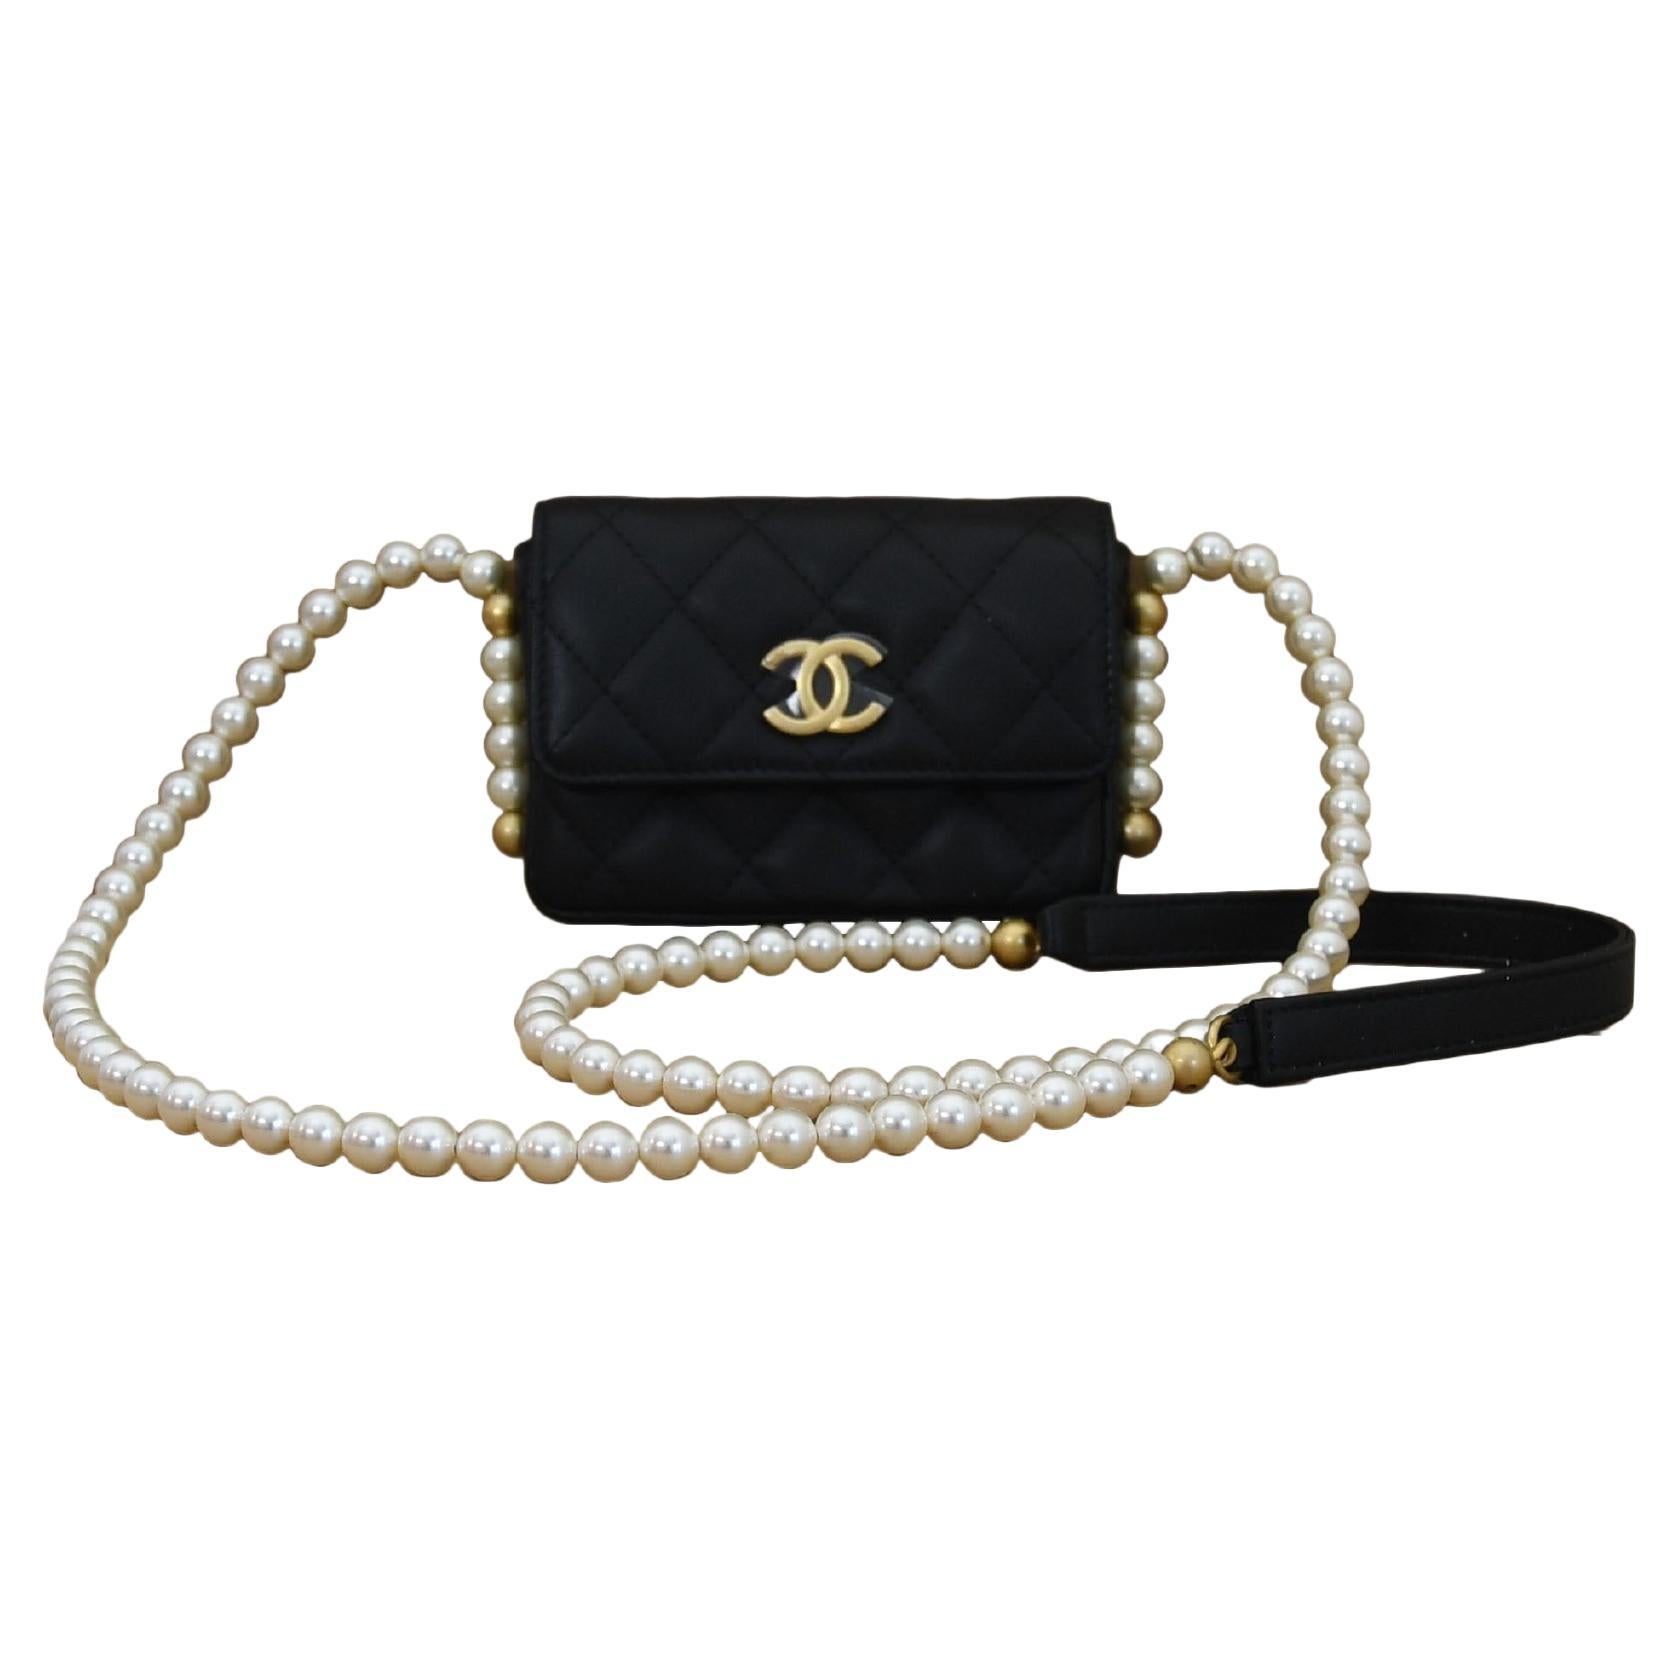 Chanel Flap Card Holder with Pearl Chain Black